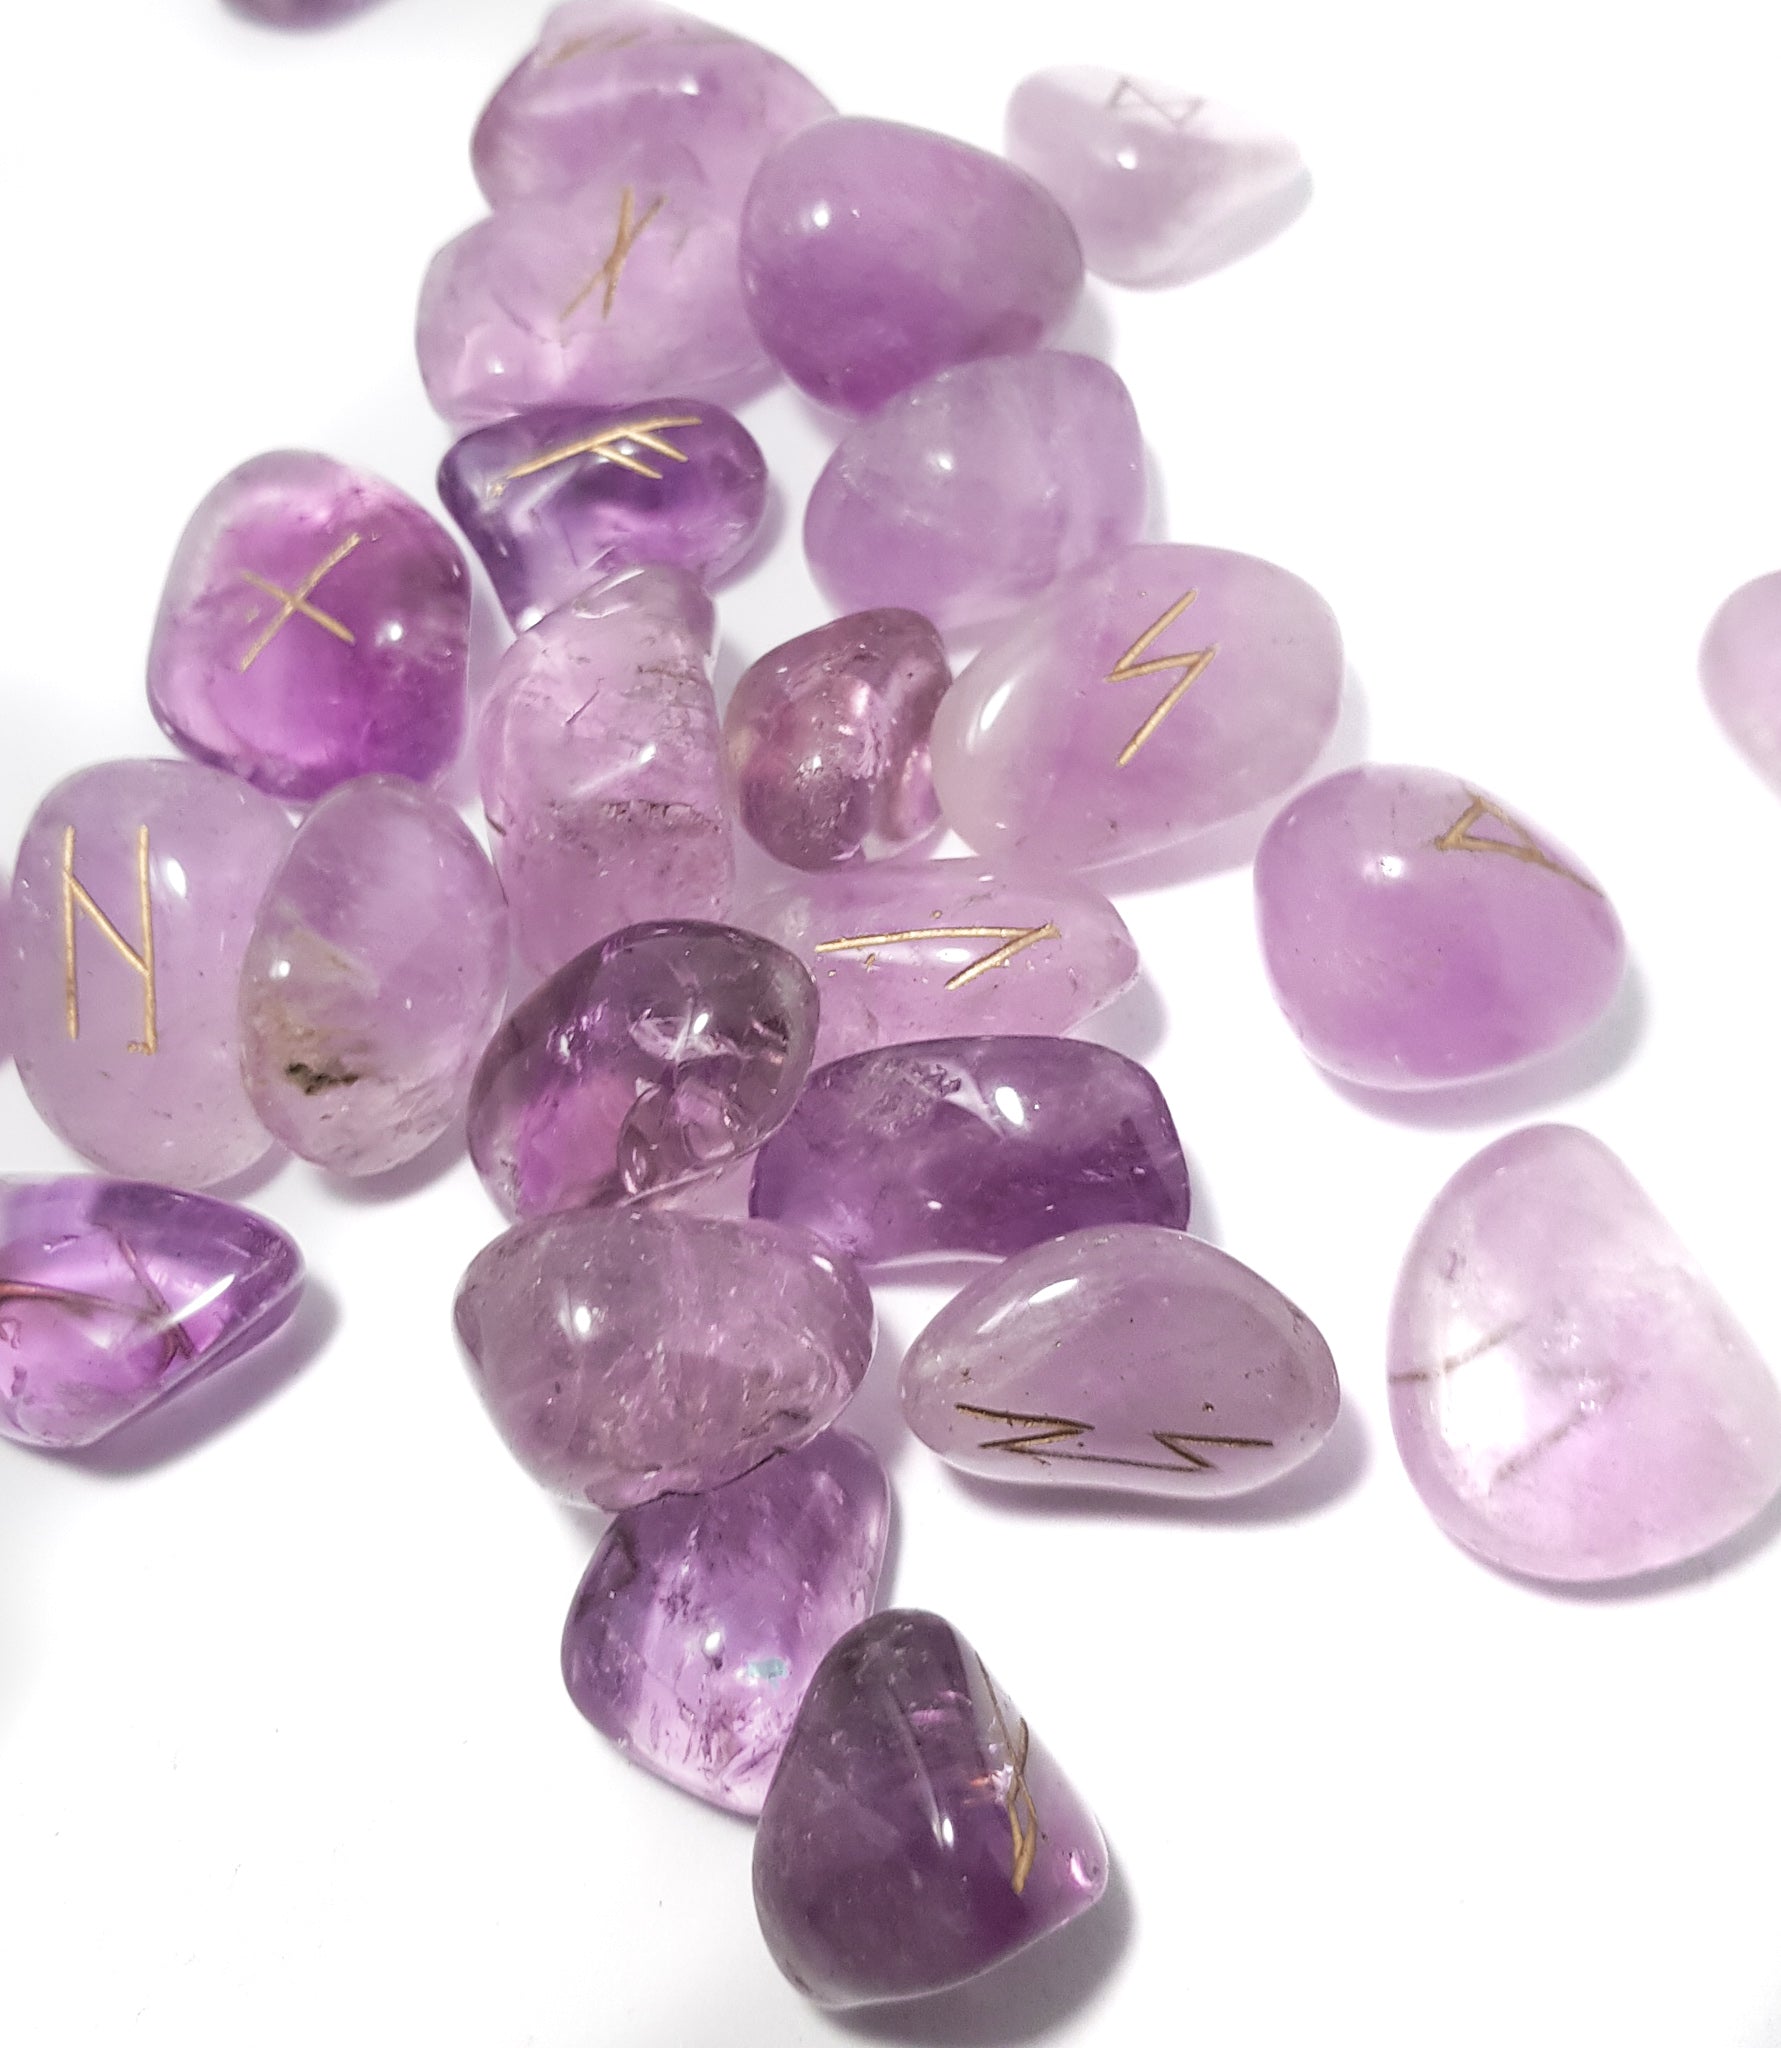 scattered set of amethyst rune stones. The pieces are purple the runic inscriptions are gold. -- science of magic